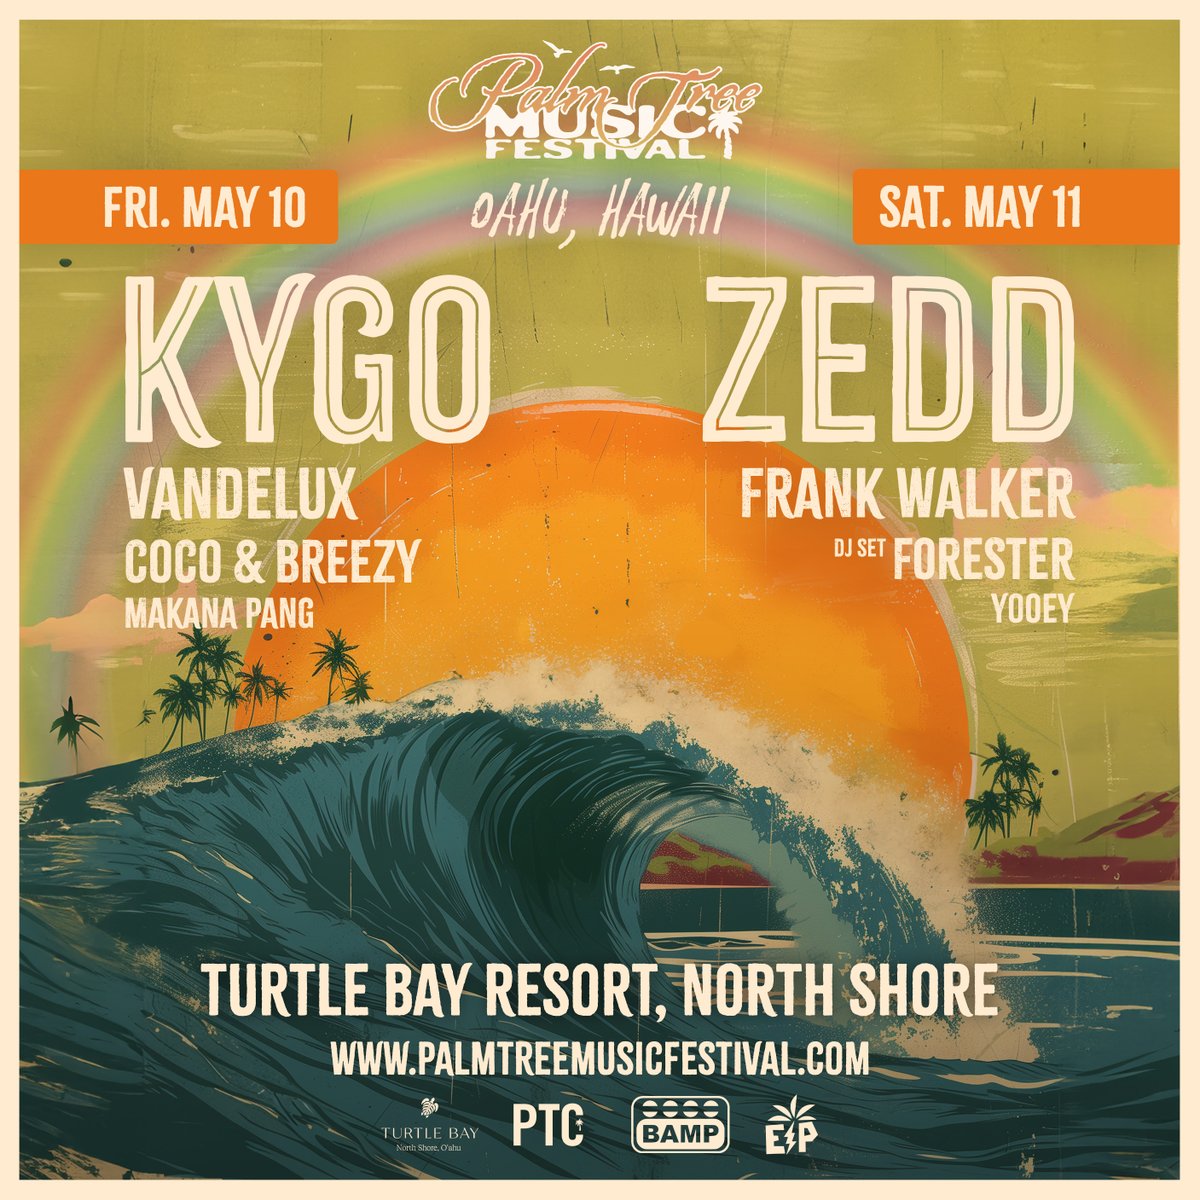 Hawaii!! 🌴 See you May 10th at the iconic Turtle Bay Resort with @palmtreefest. Pre-Sale starts tomorrow 3/14 @ 10AM HST. See you there! 🤝 Pre-Sale Signup- palmtreemusicfestival.com/hawaii-signup